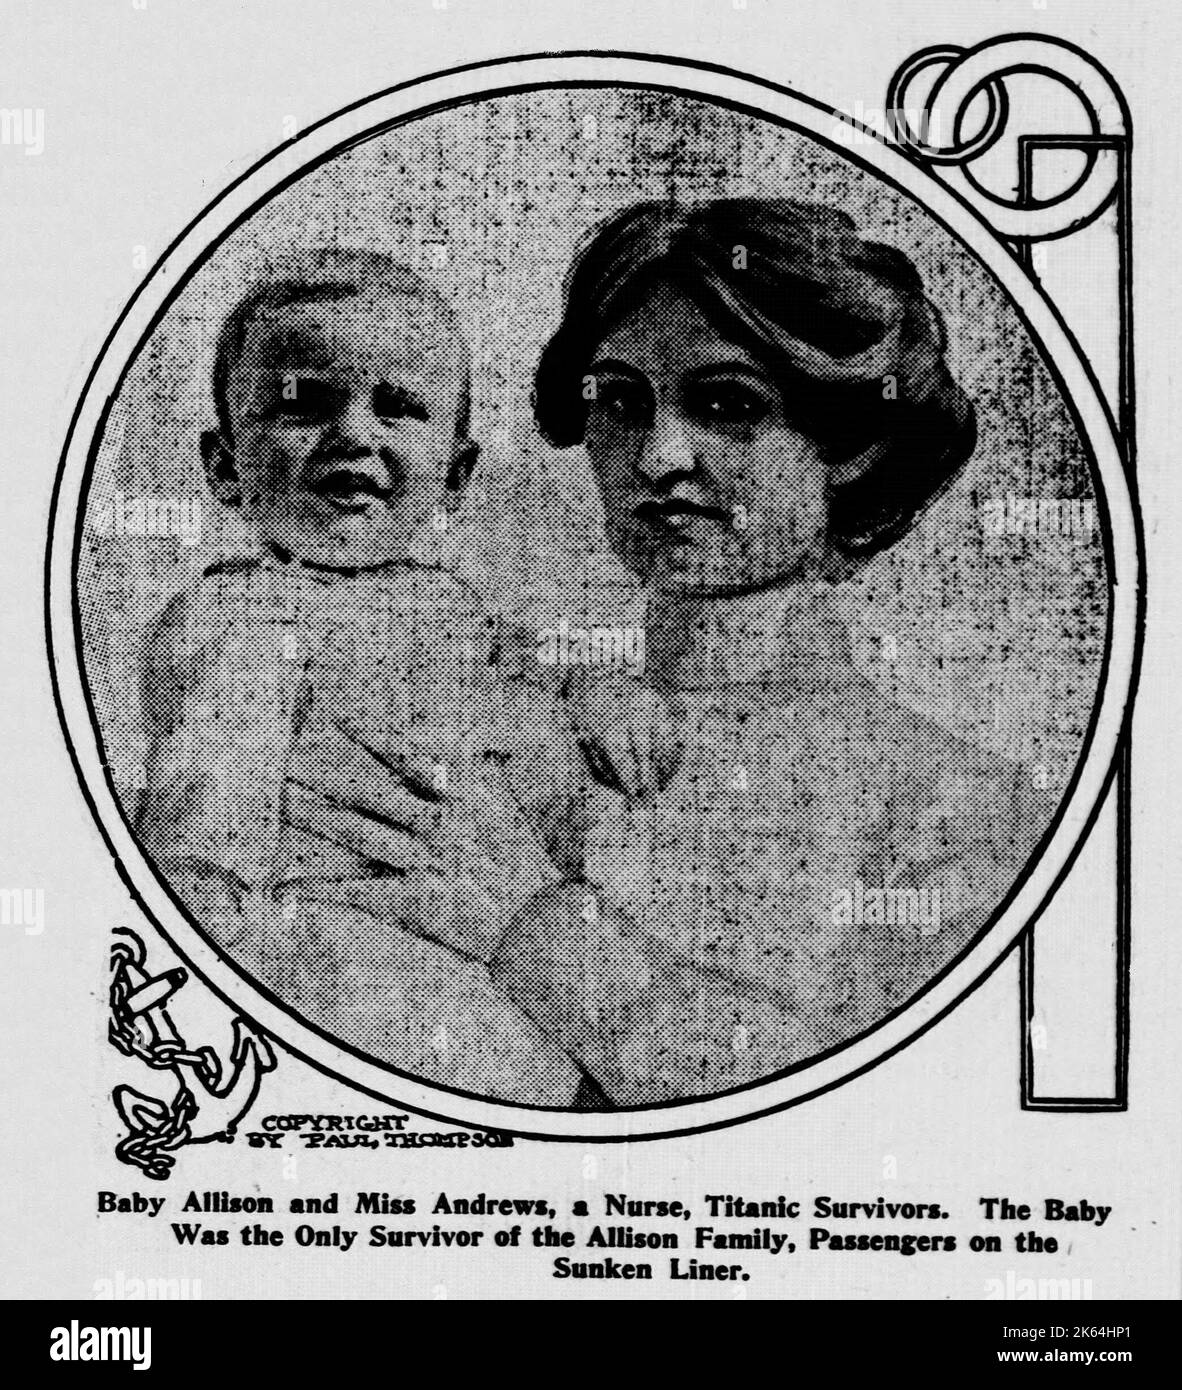 Baby Hudson Trevor Allison (1911-1929) and Alice Catherine Cleaver, his Nurse - Titanic Survivors. The baby was the only survivor of the Allison family (all travelling in 1st Class) after the luxury liner sank.     Date: 1912 Stock Photo